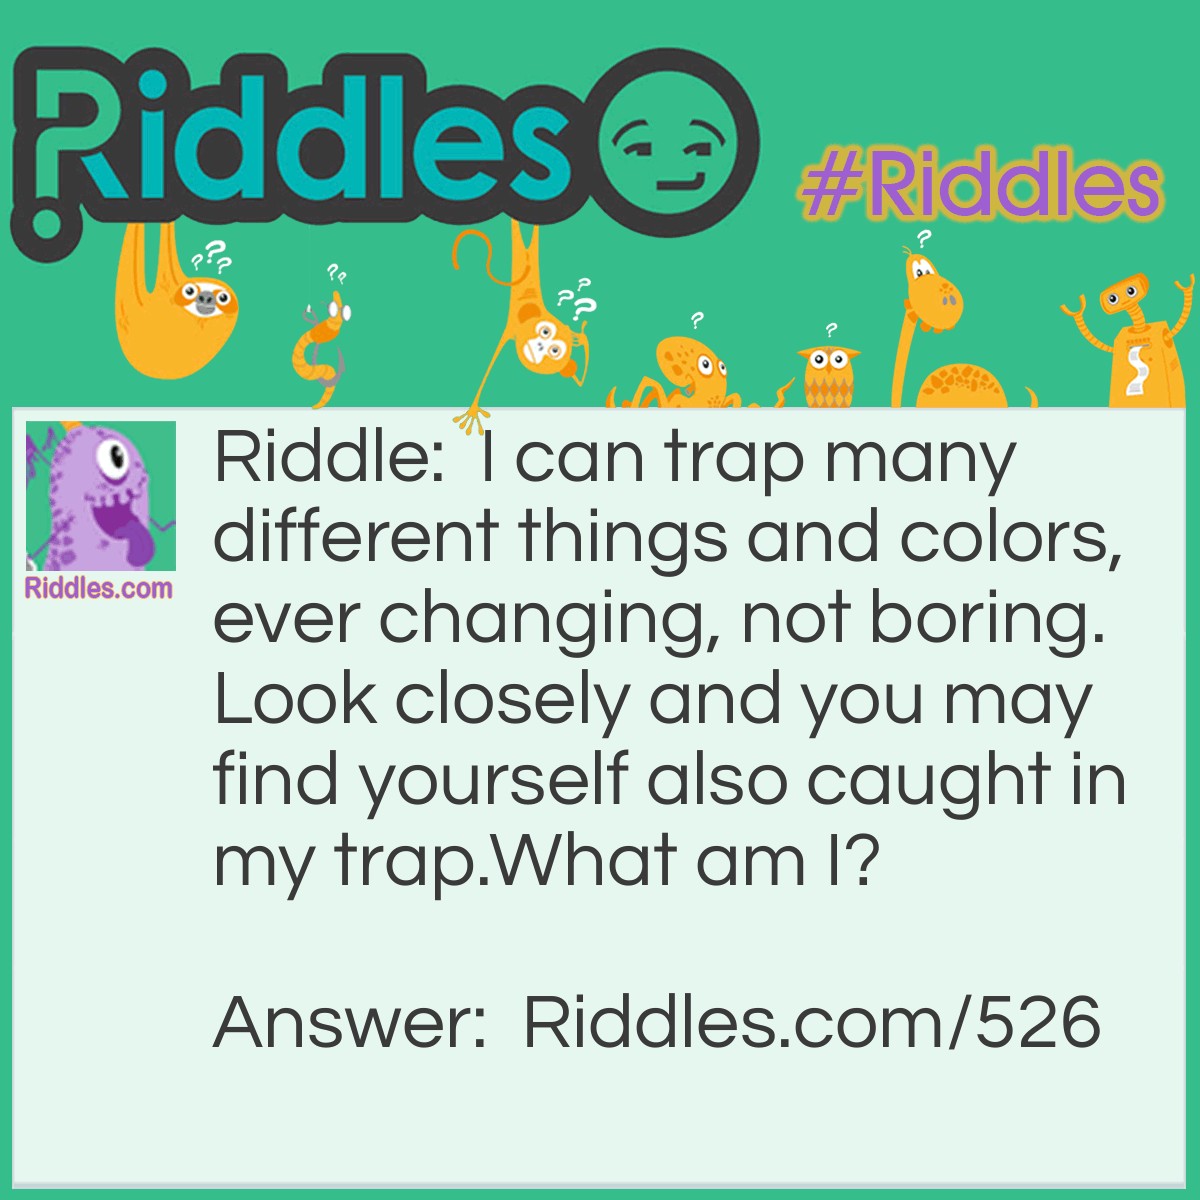 Riddle: I can trap many different things and colors, ever changing, not boring. Look closely and you may find yourself also caught in my trap.
What am I? Answer: A mirror, or a pool of water.